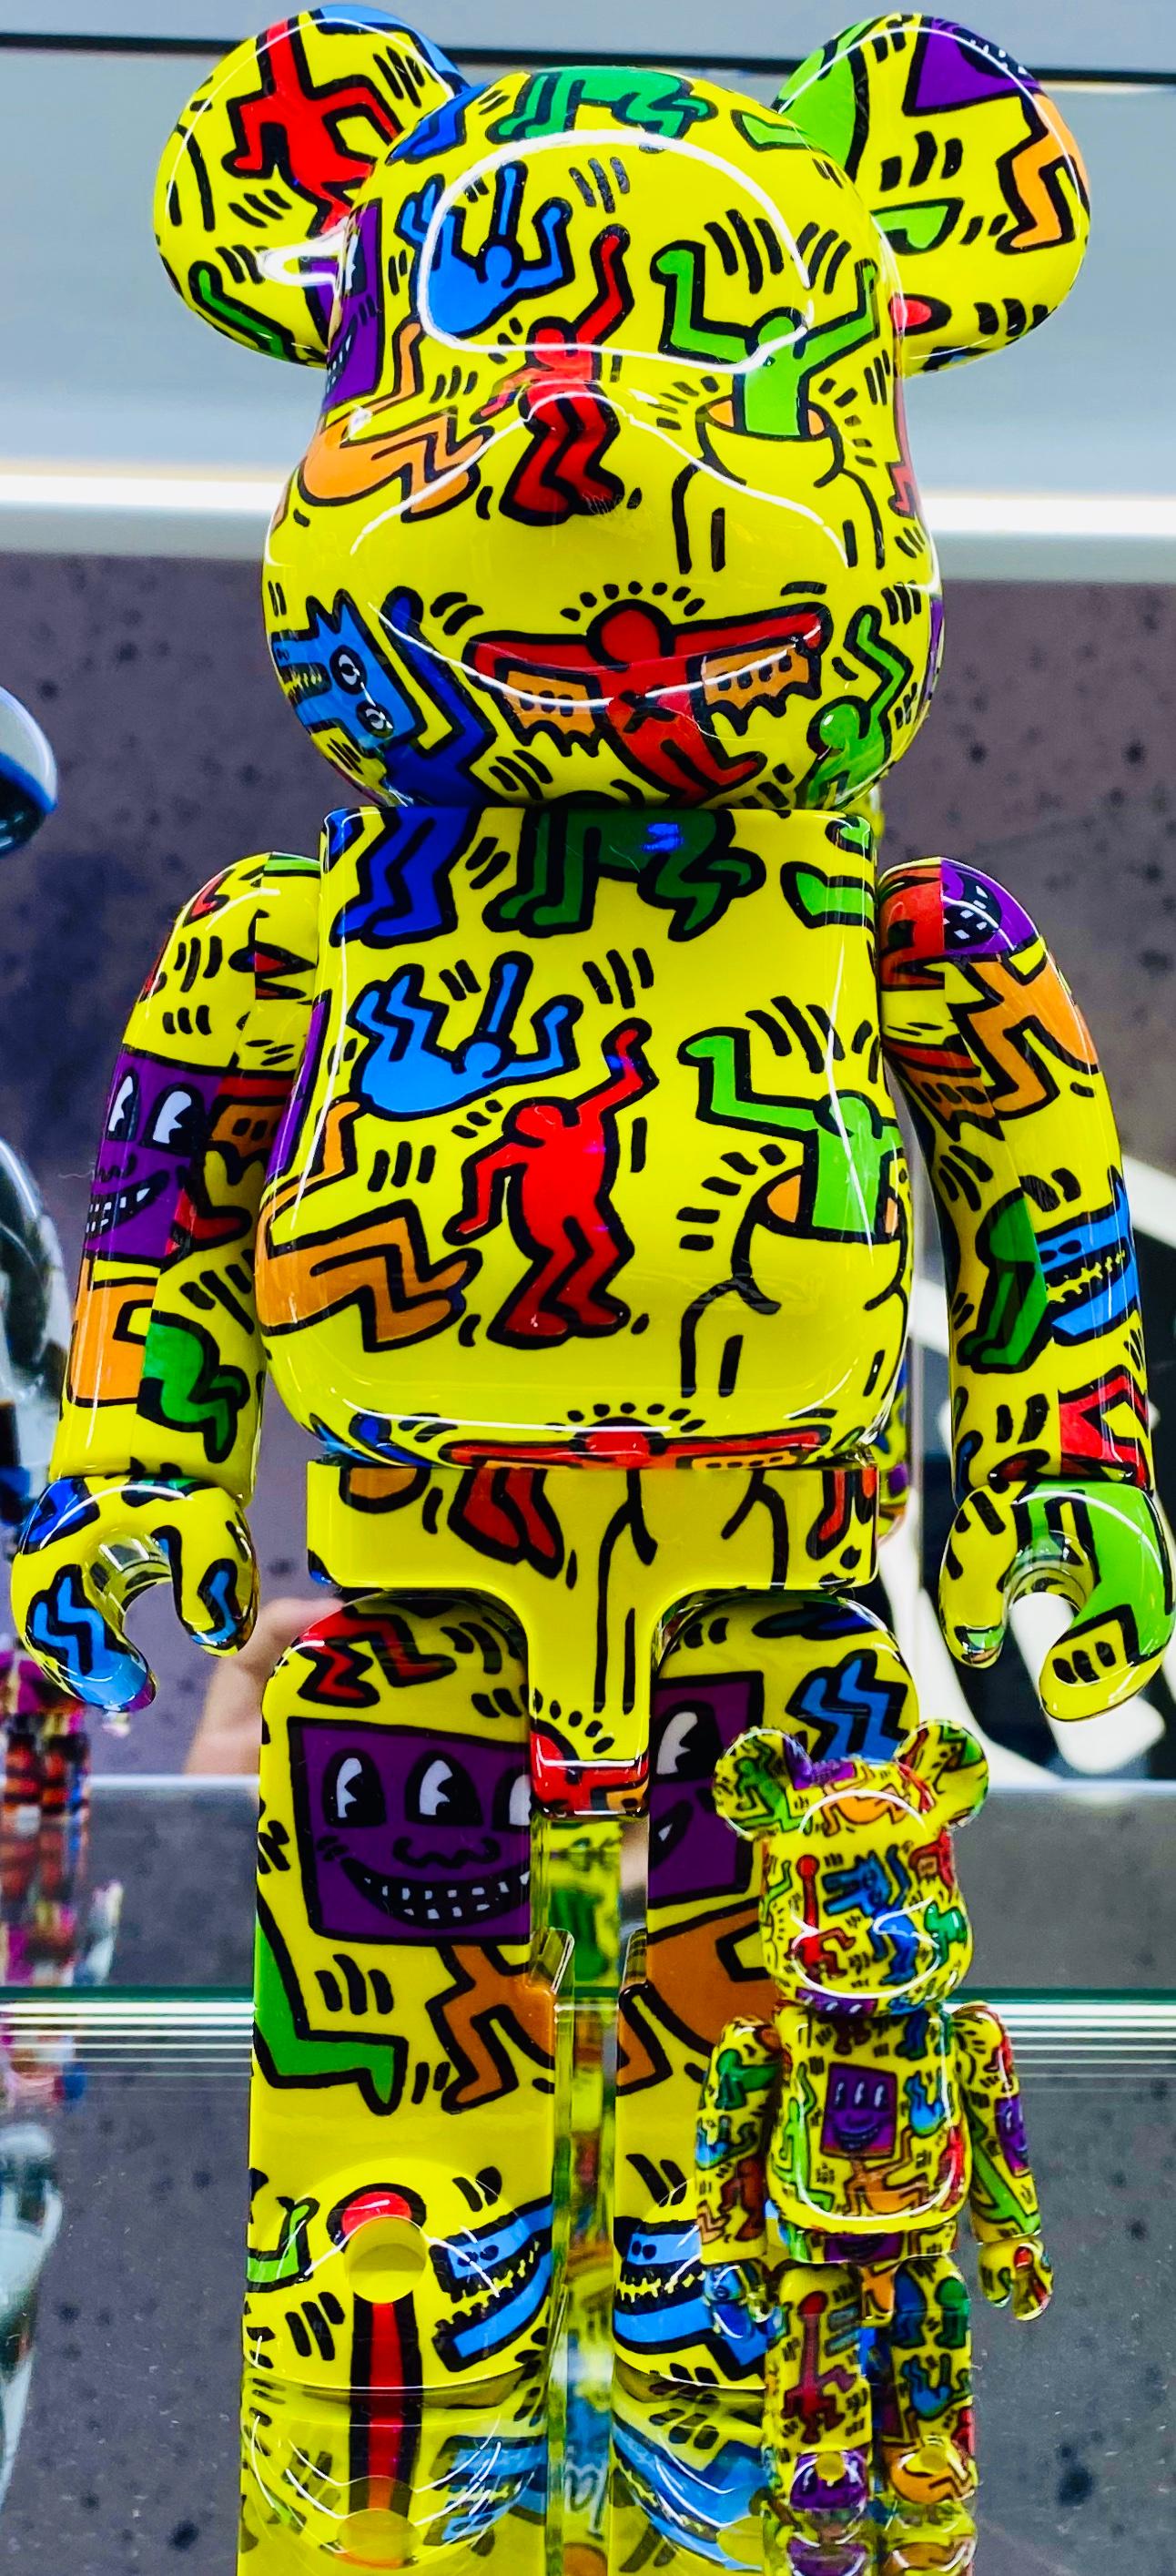 Keith Haring Bearbrick 400% Companion (Haring BE@RBRICK) - Sculpture by (after) Keith Haring